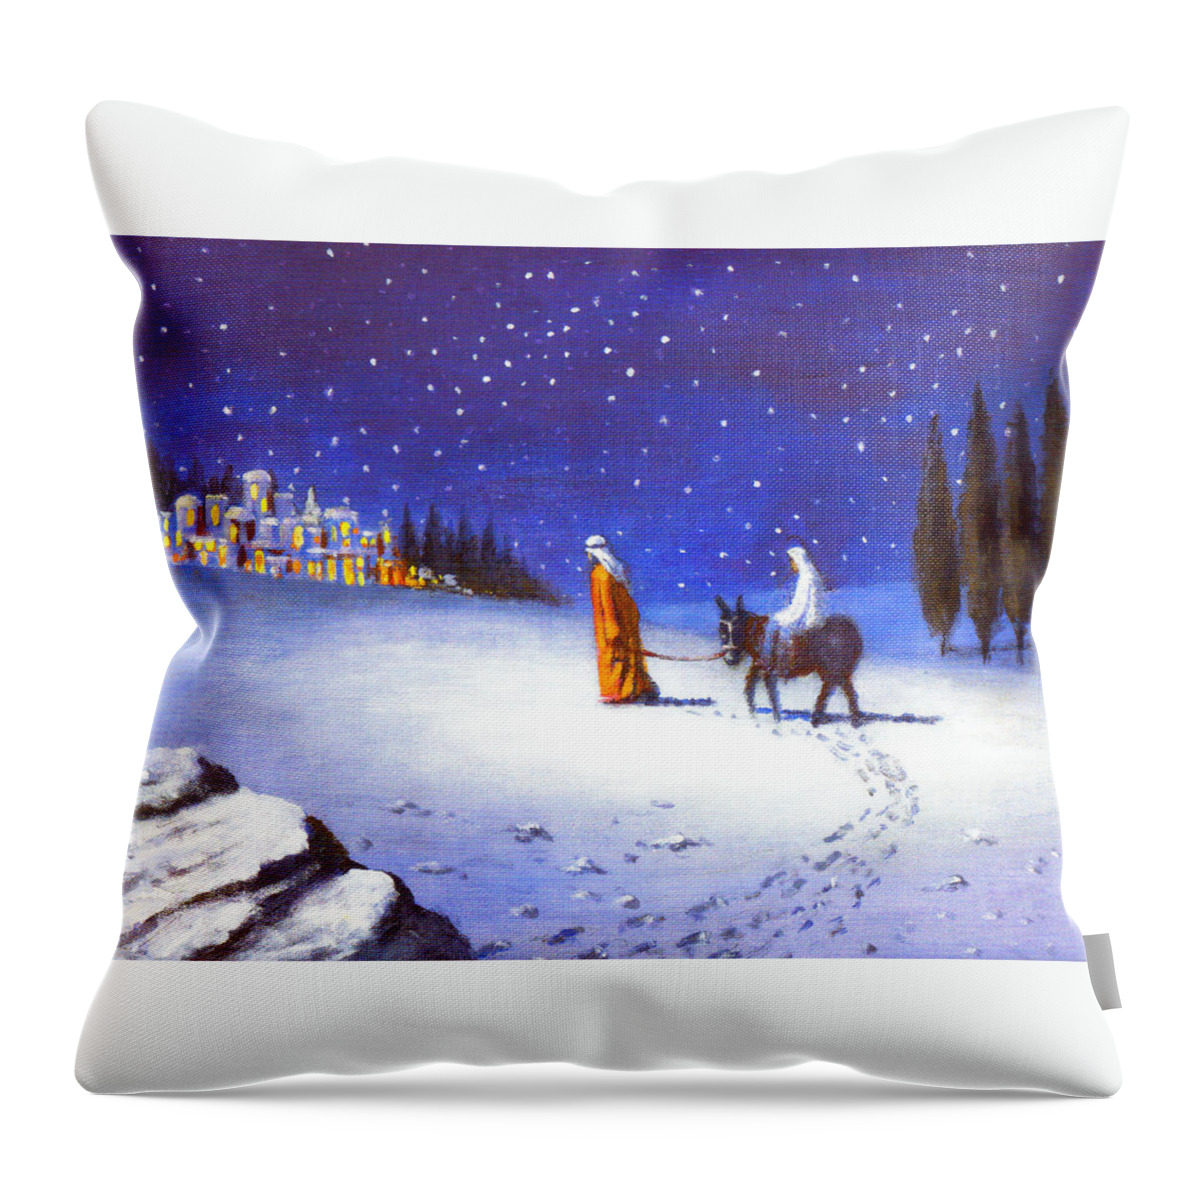 Snow Throw Pillow featuring the photograph Flight into Snow by Munir Alawi